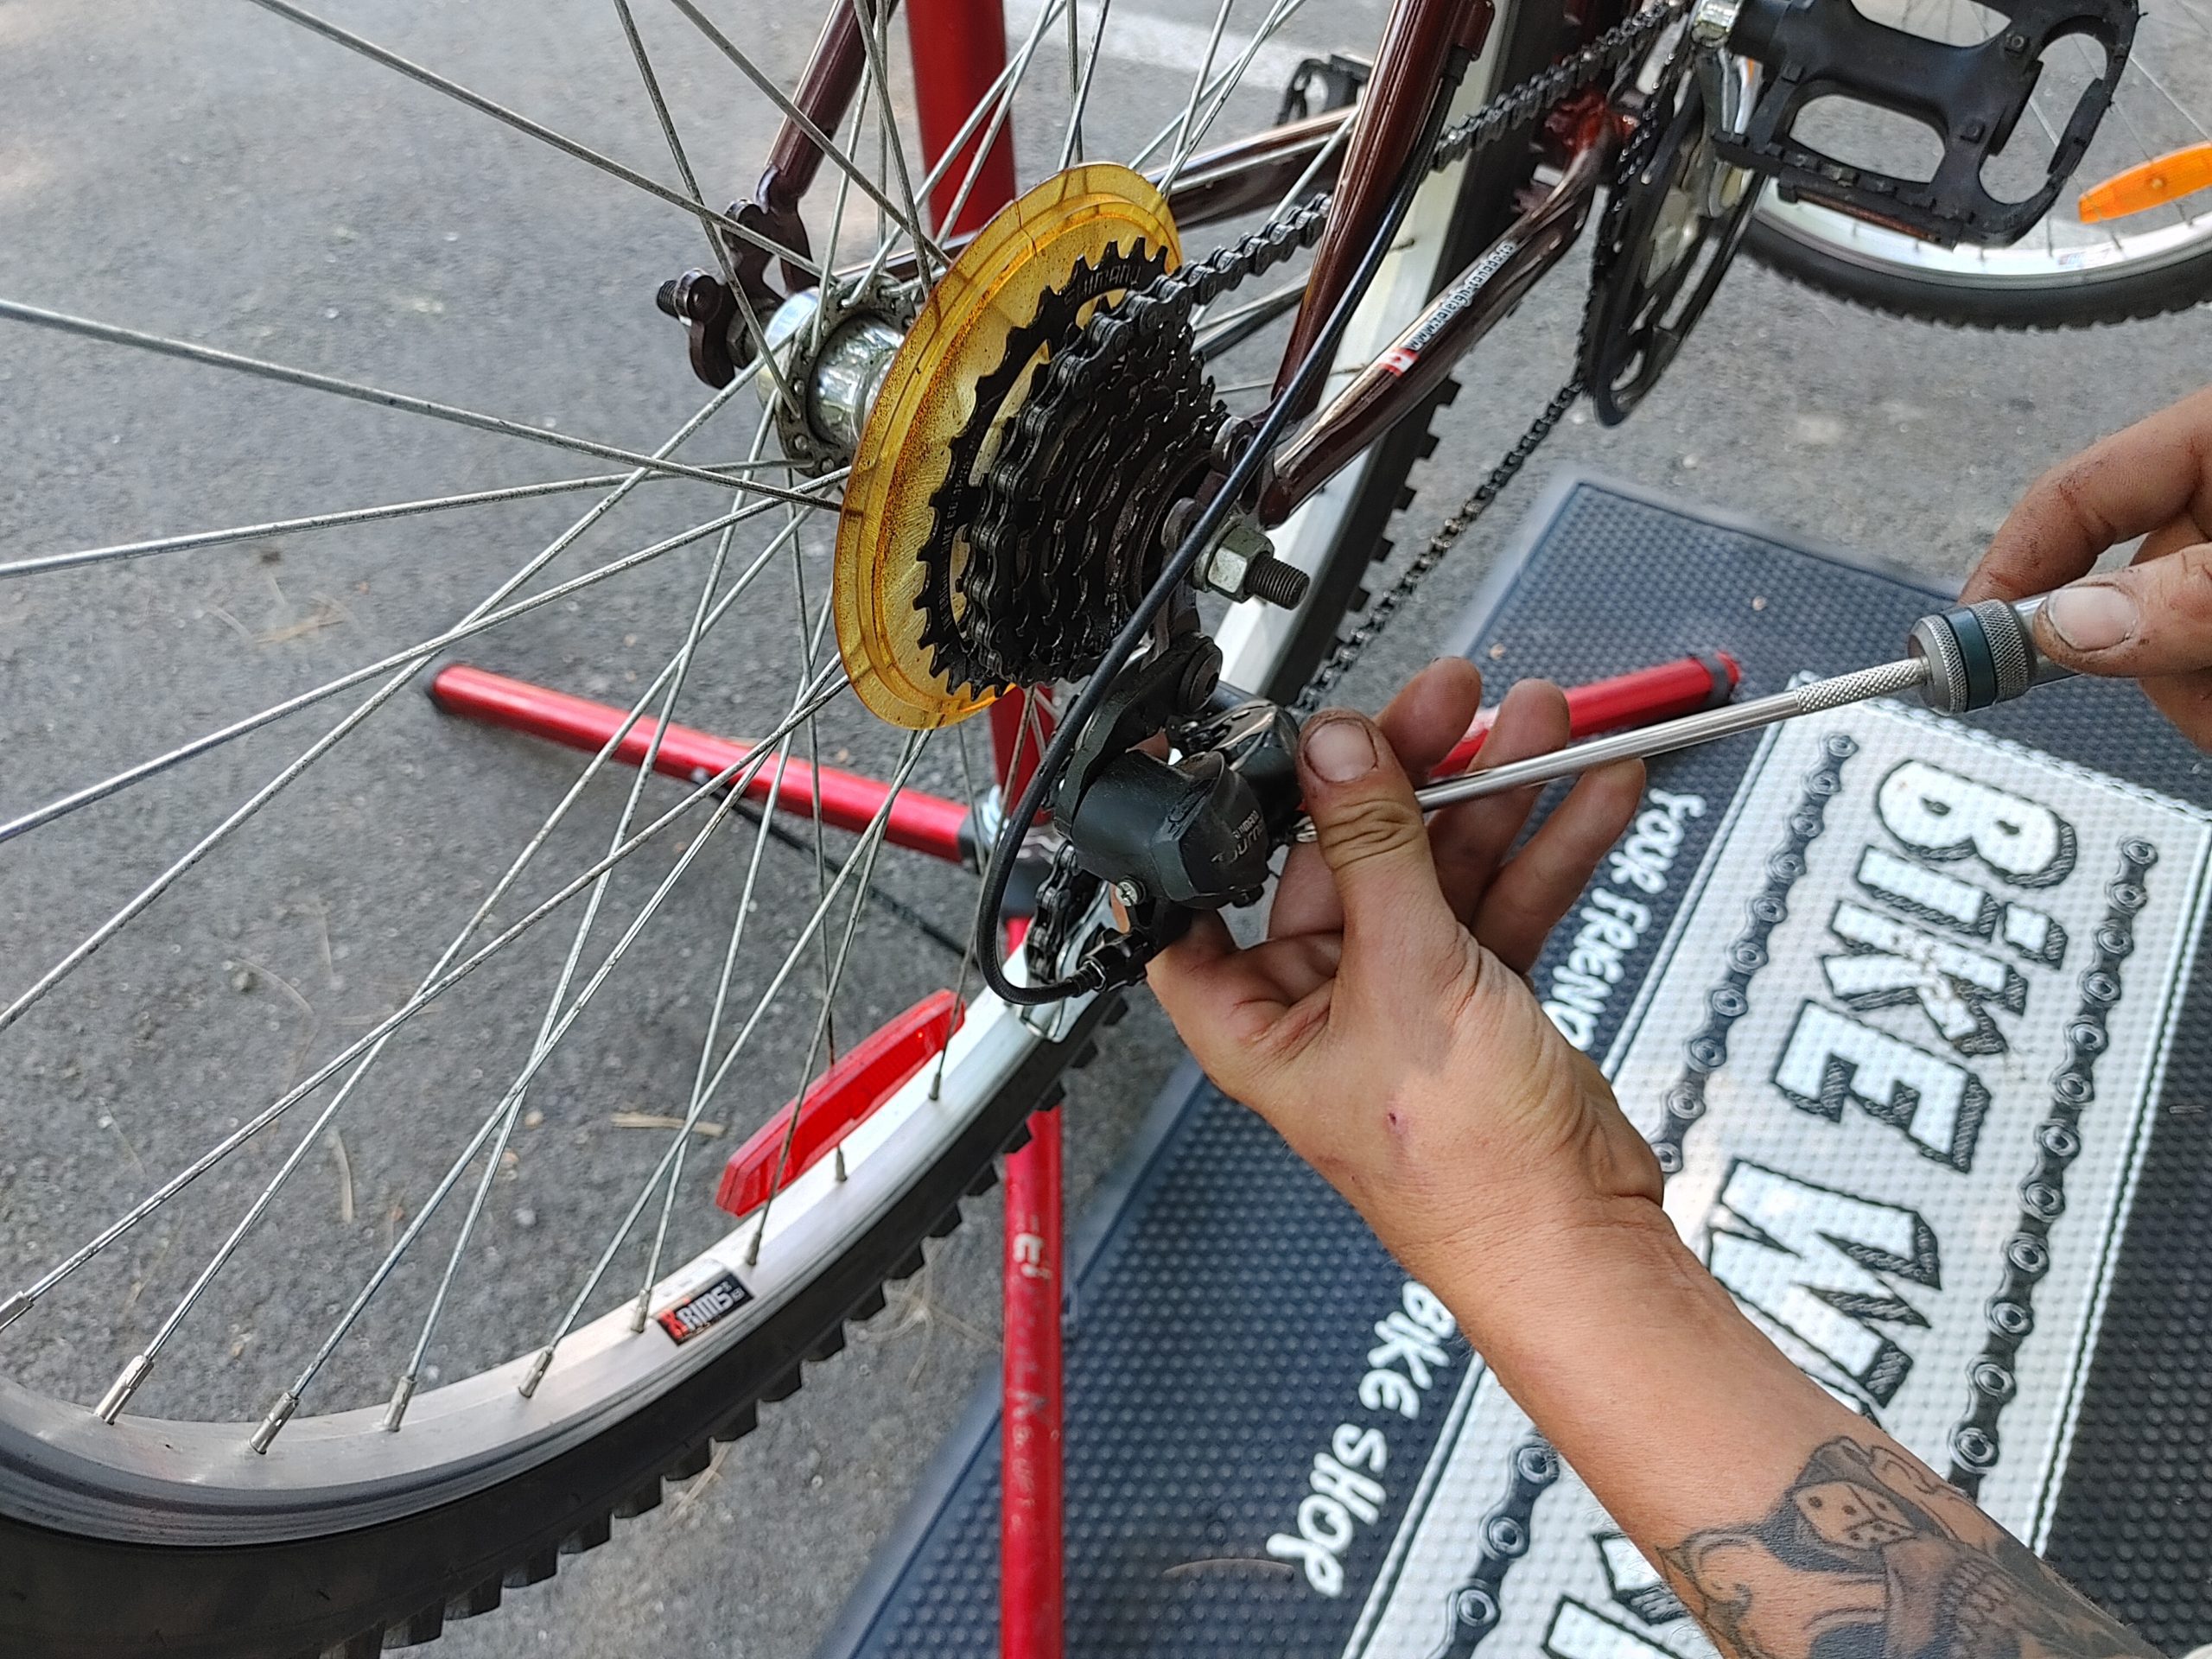 A Hand tuning up the Mountain Bike